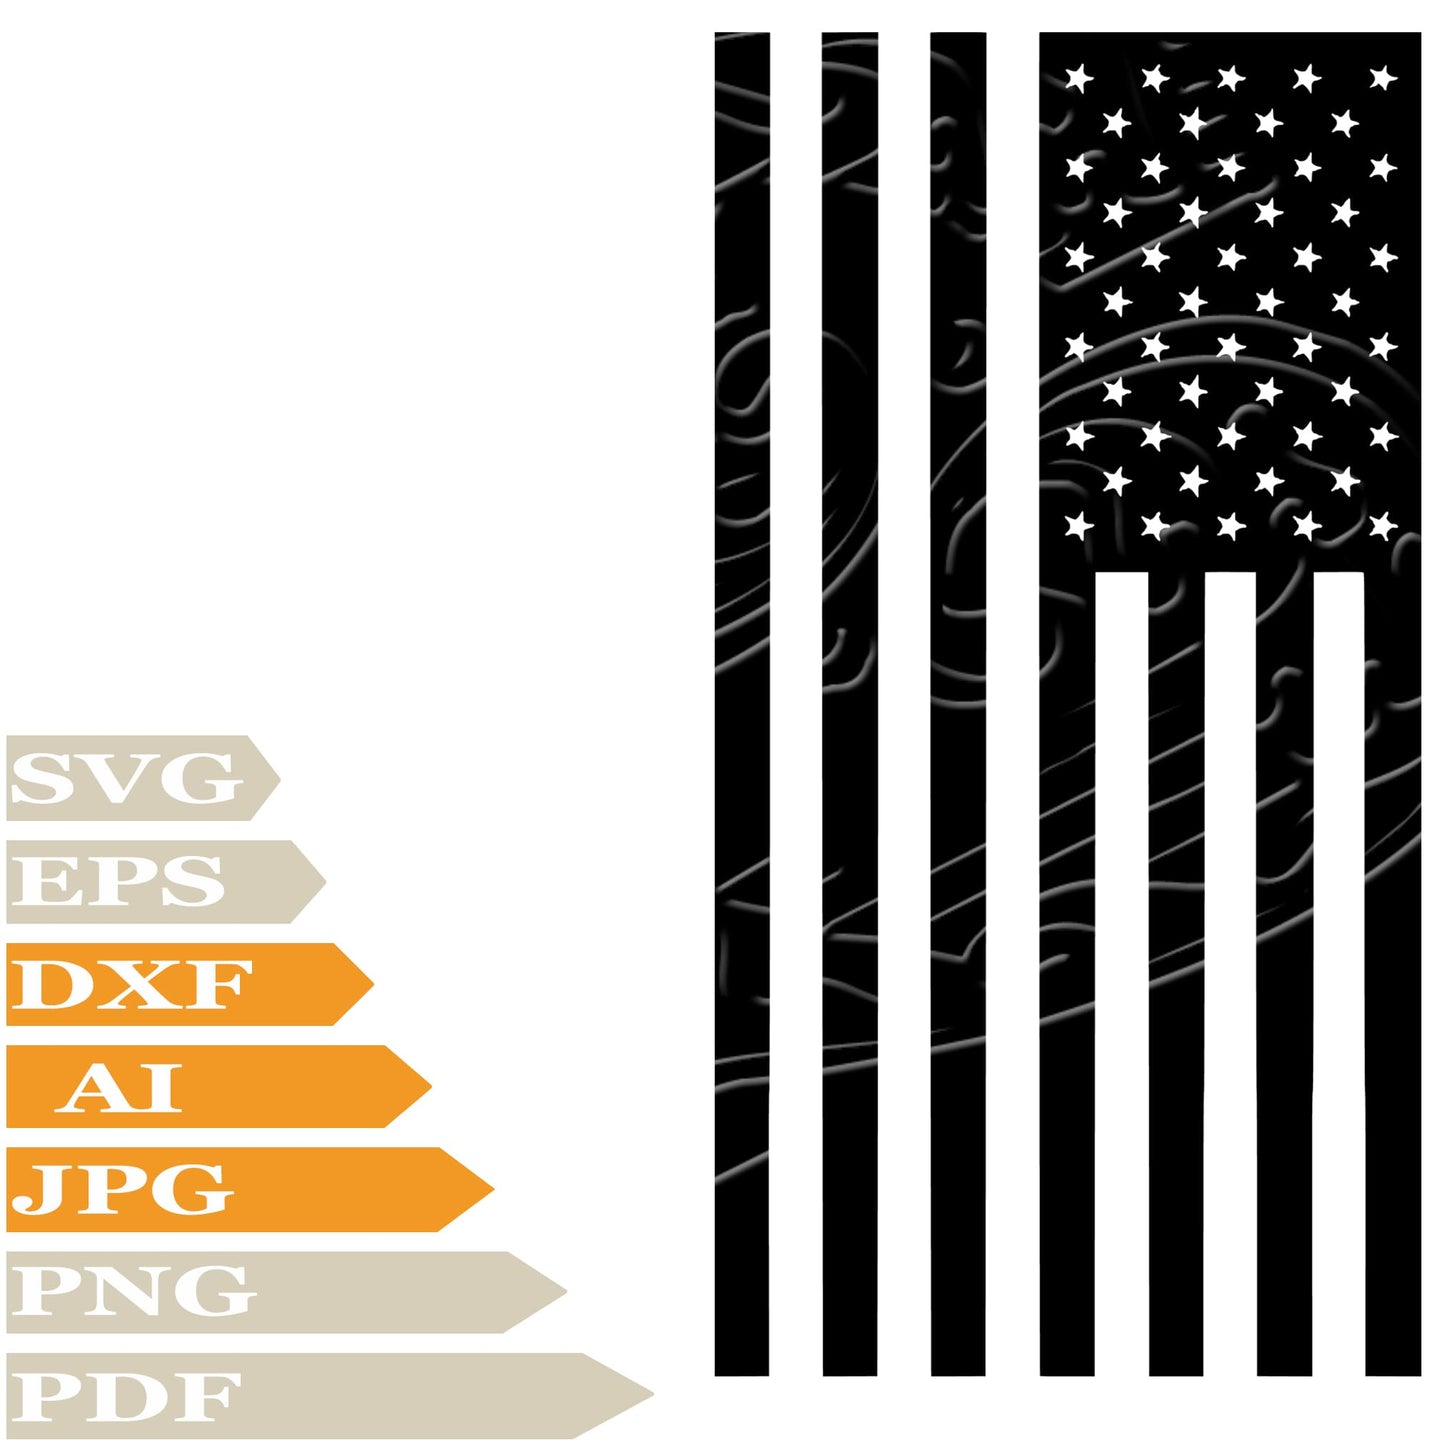 Usa Flag, Star Striped Flag Svg File, Image Cut, Png, For Tattoo, Silhouette, Digital Vector Download, Cut File, Clipart, For Cricut